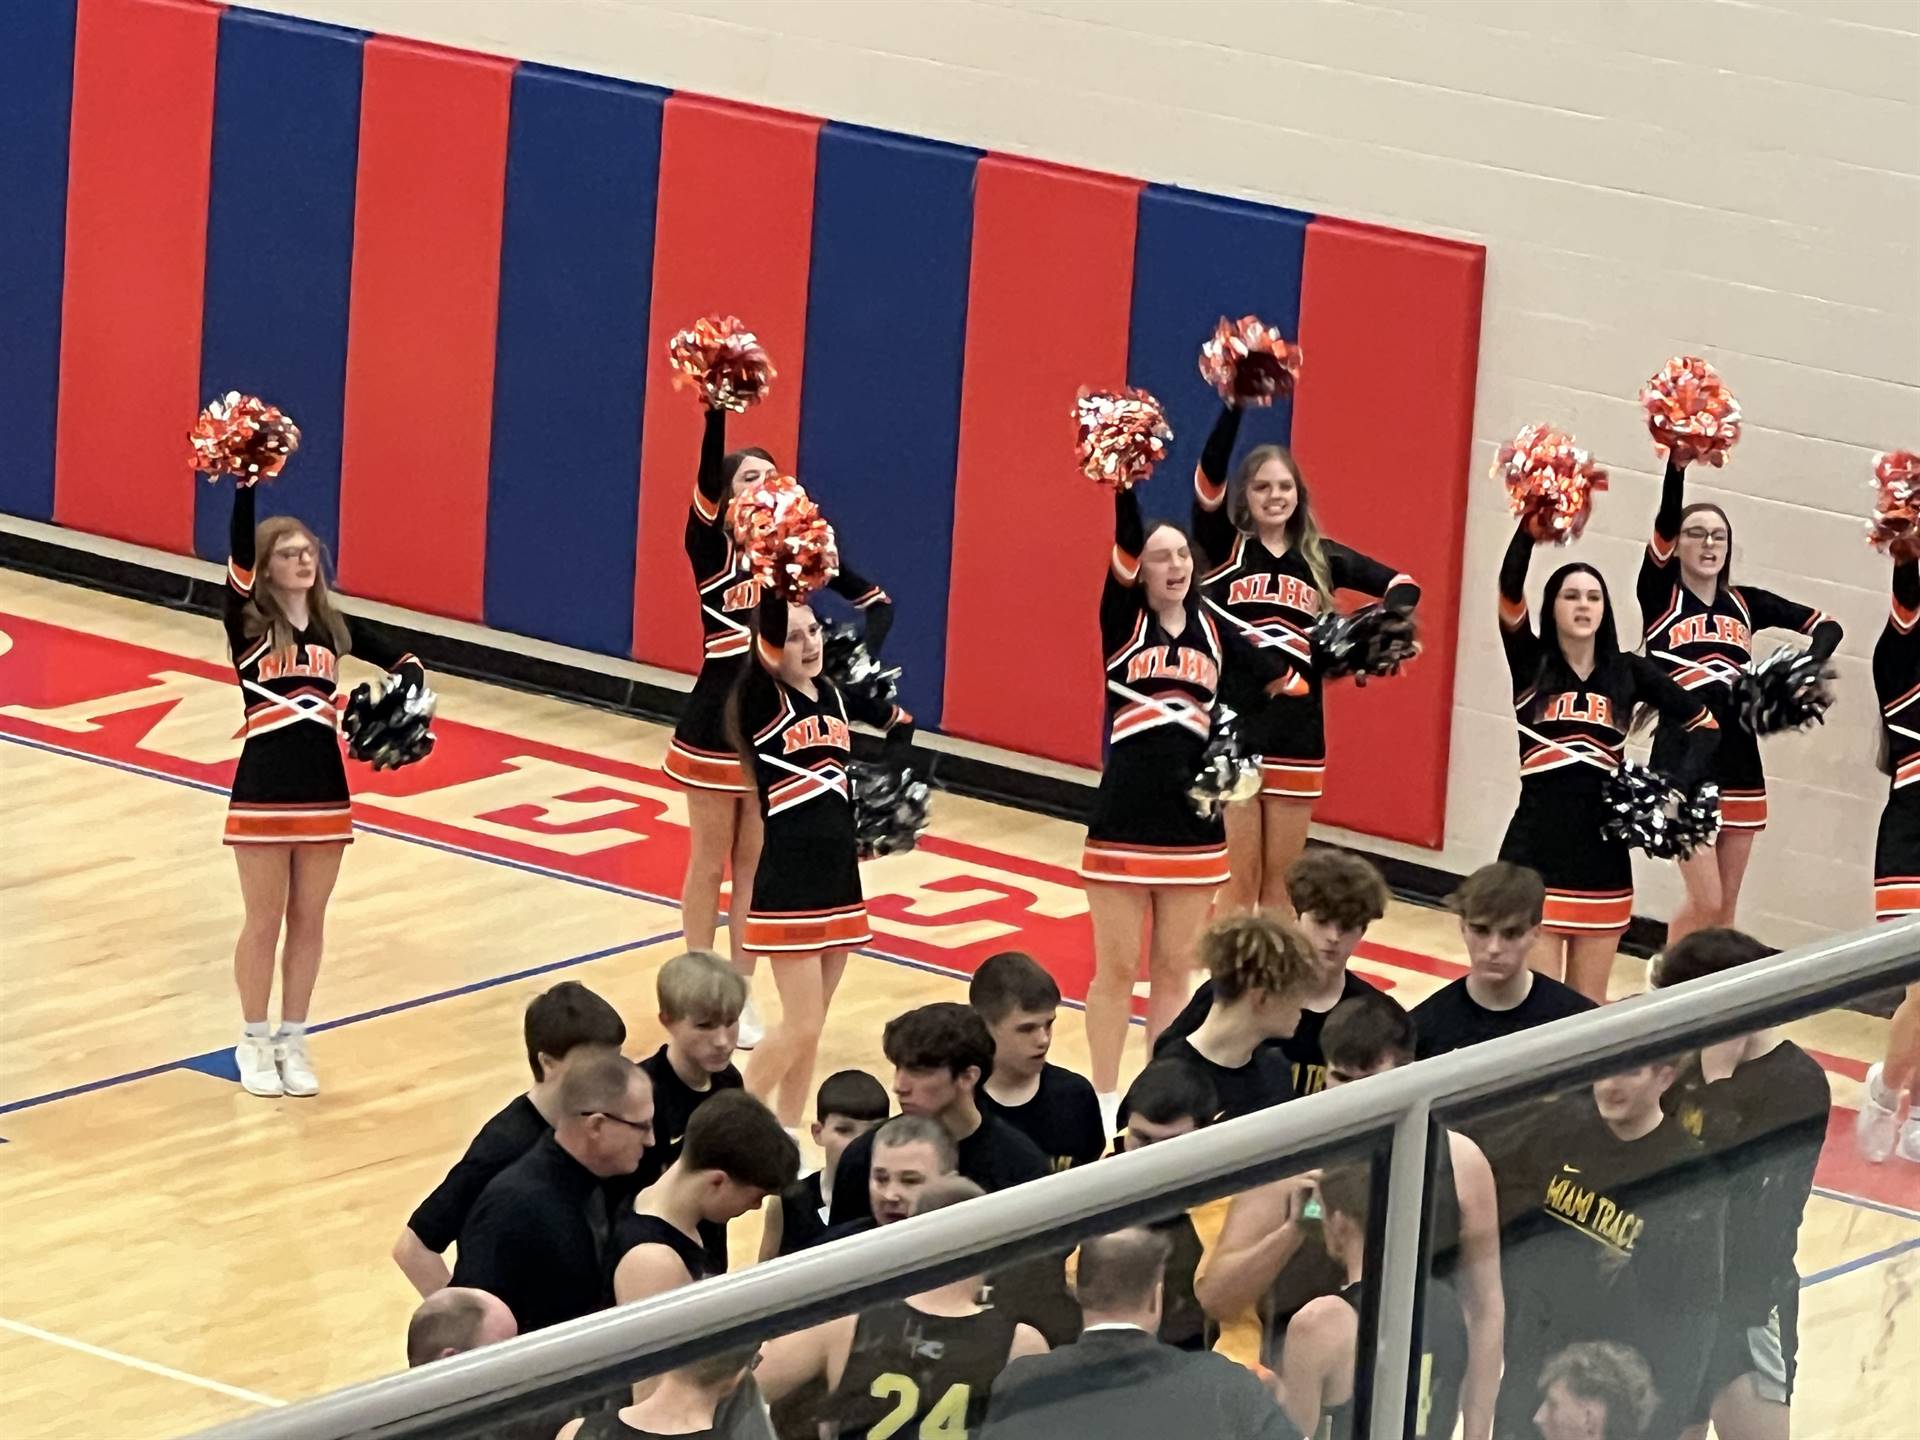 Cheerleaders at the Sectional Basketball Game